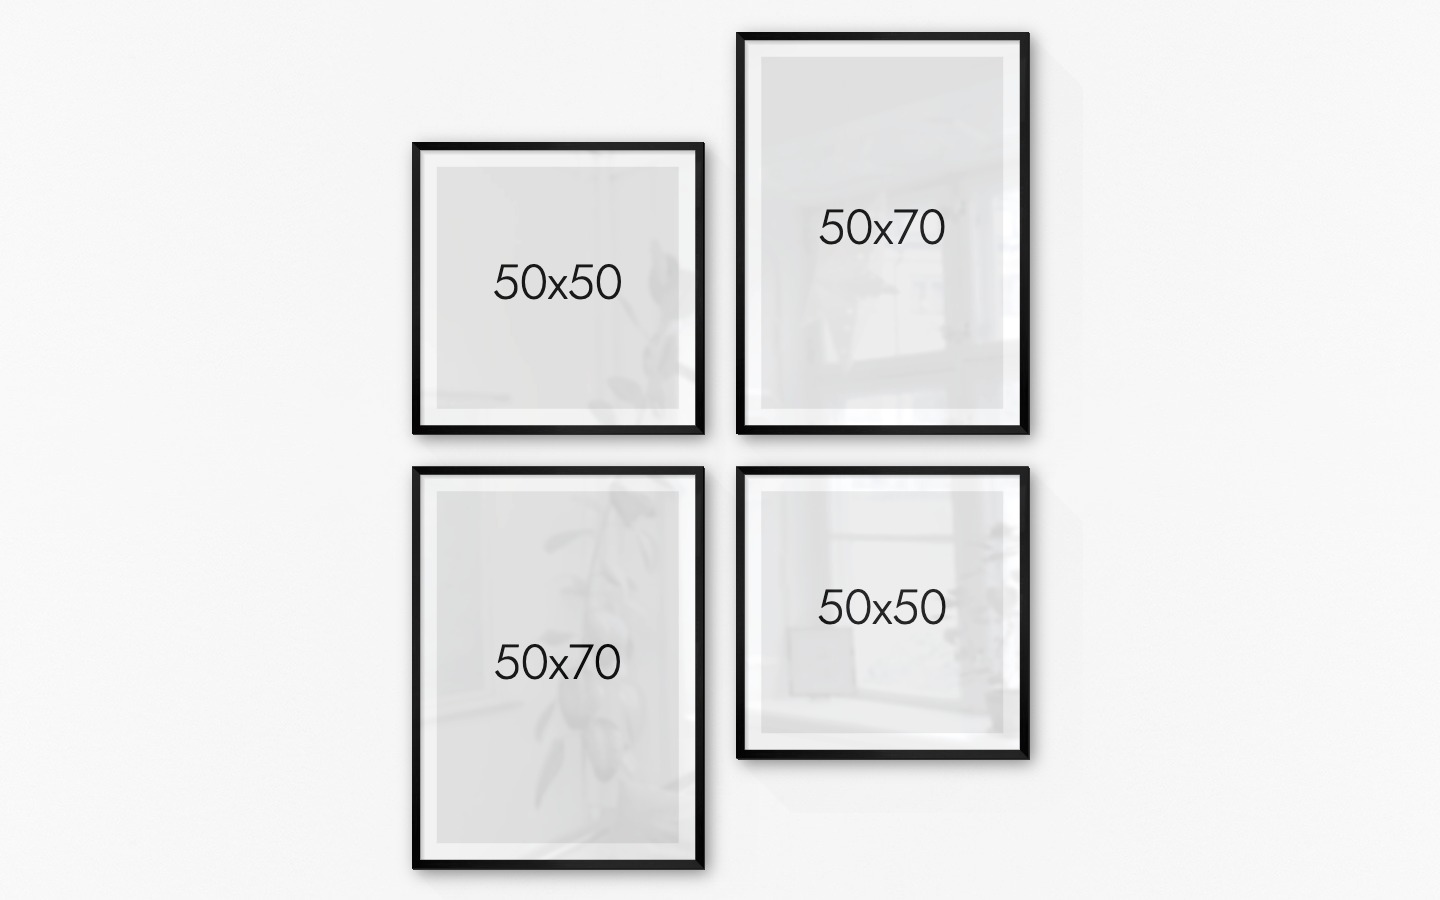 Gallery wall with picture frames in black in sizes 50x50 and 50x70